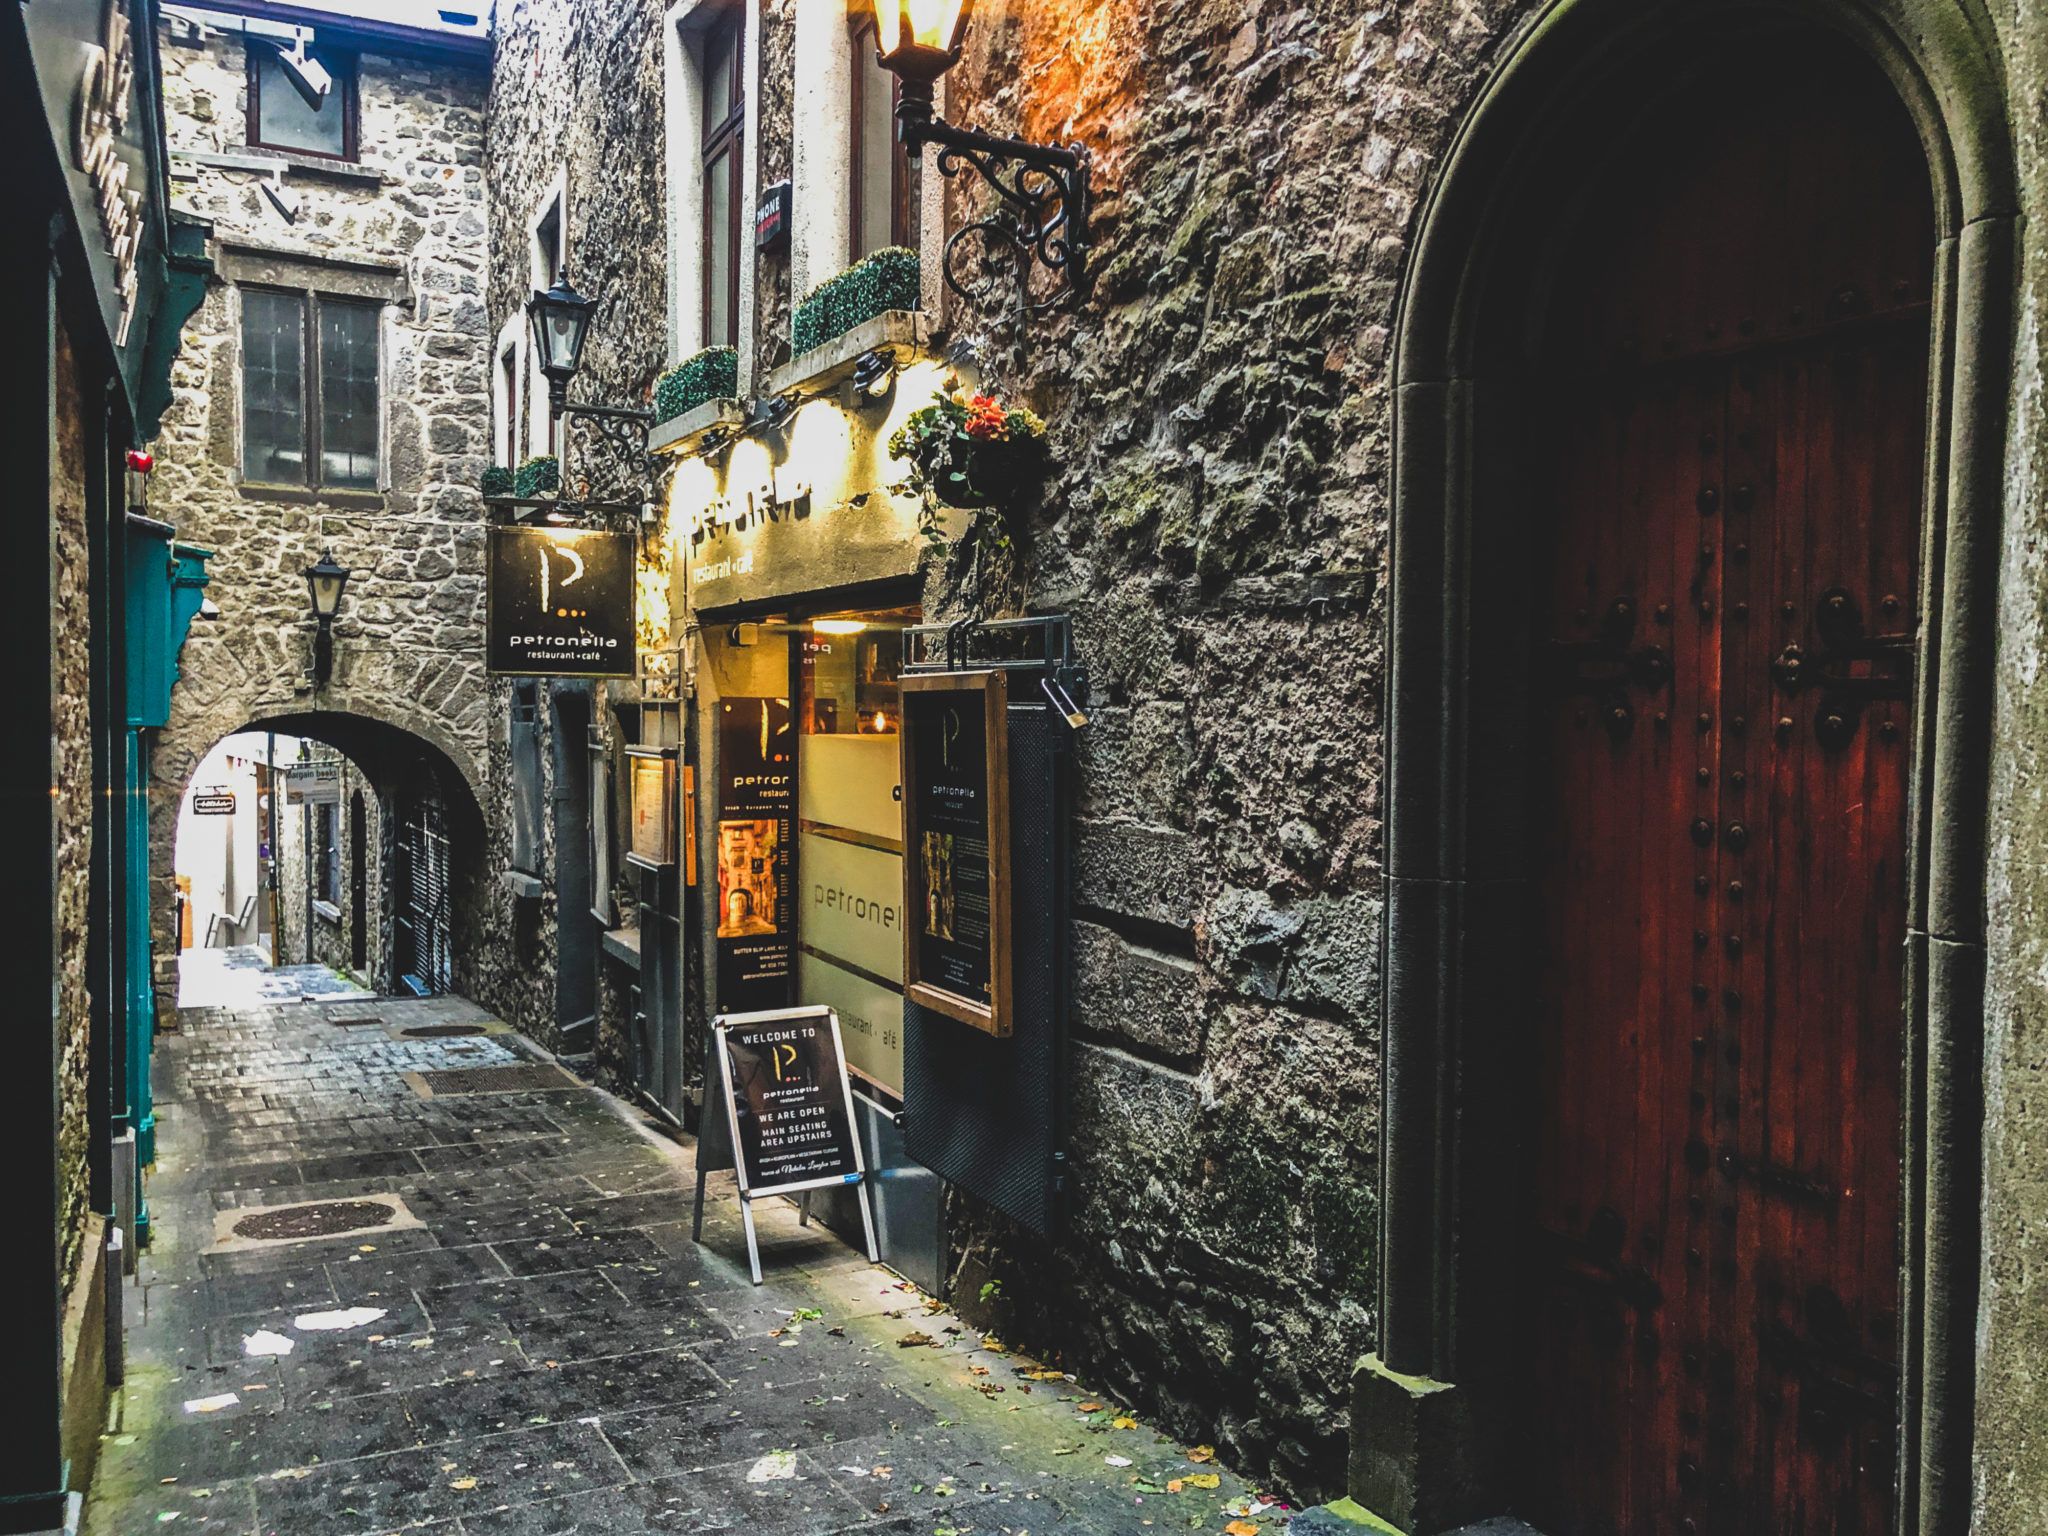 Make a break for Kilkenny: What to do when visiting this historic place